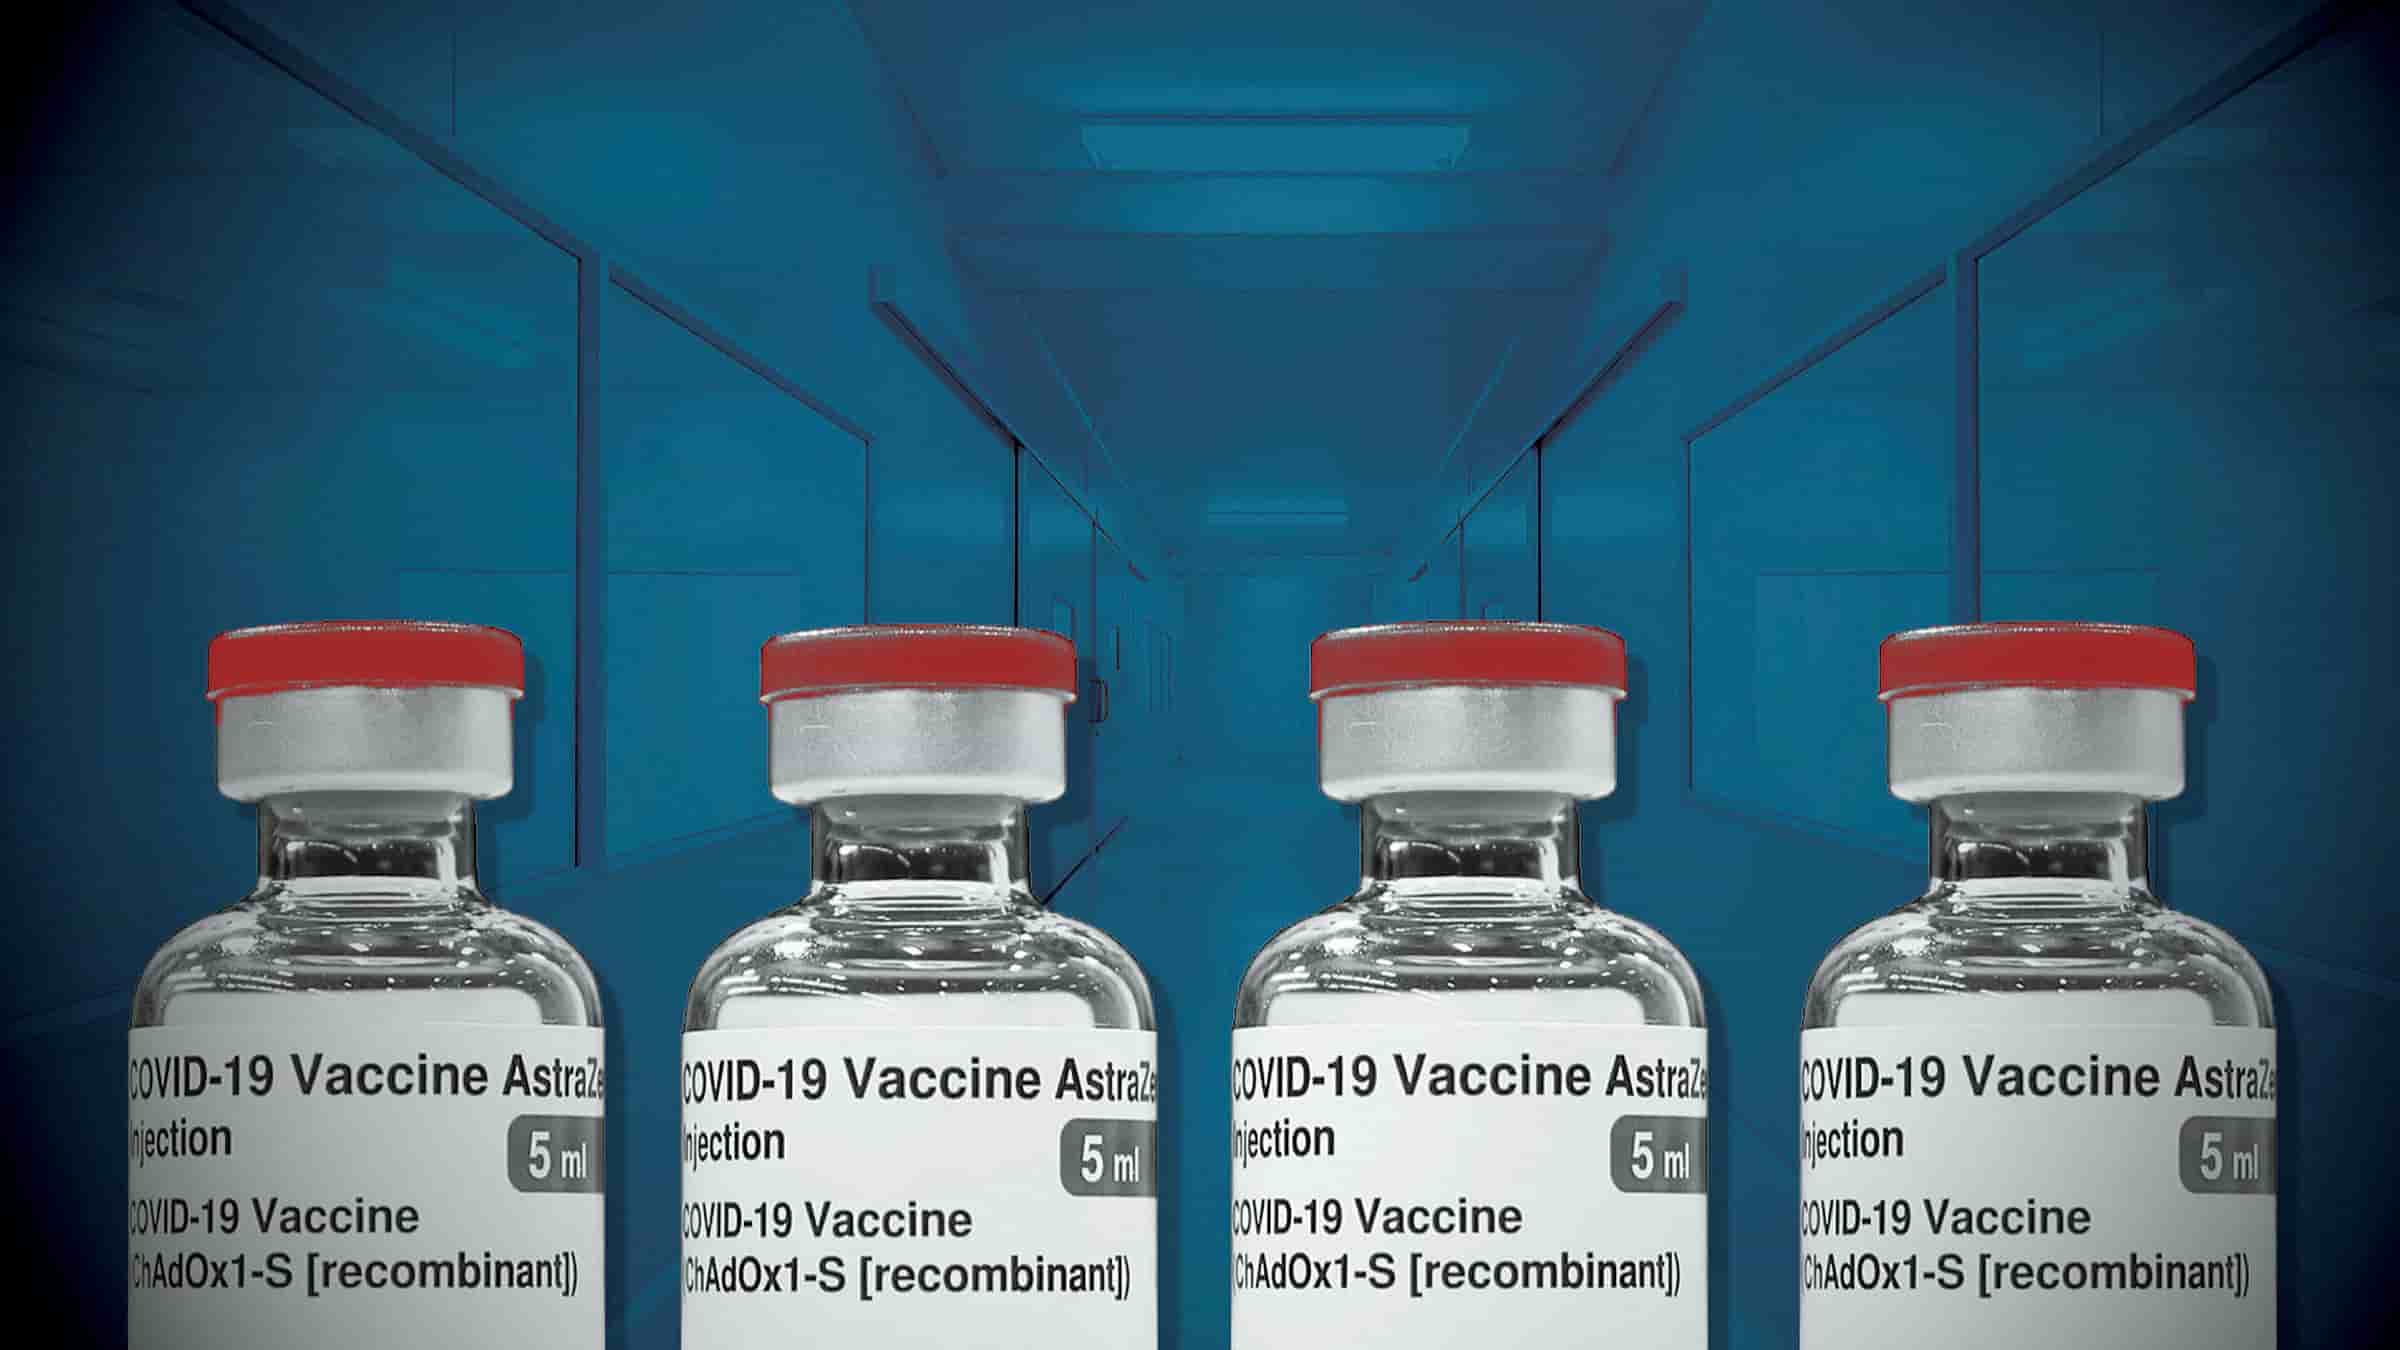 Minister refuses to confirm claim that Russia stole Oxford vaccine